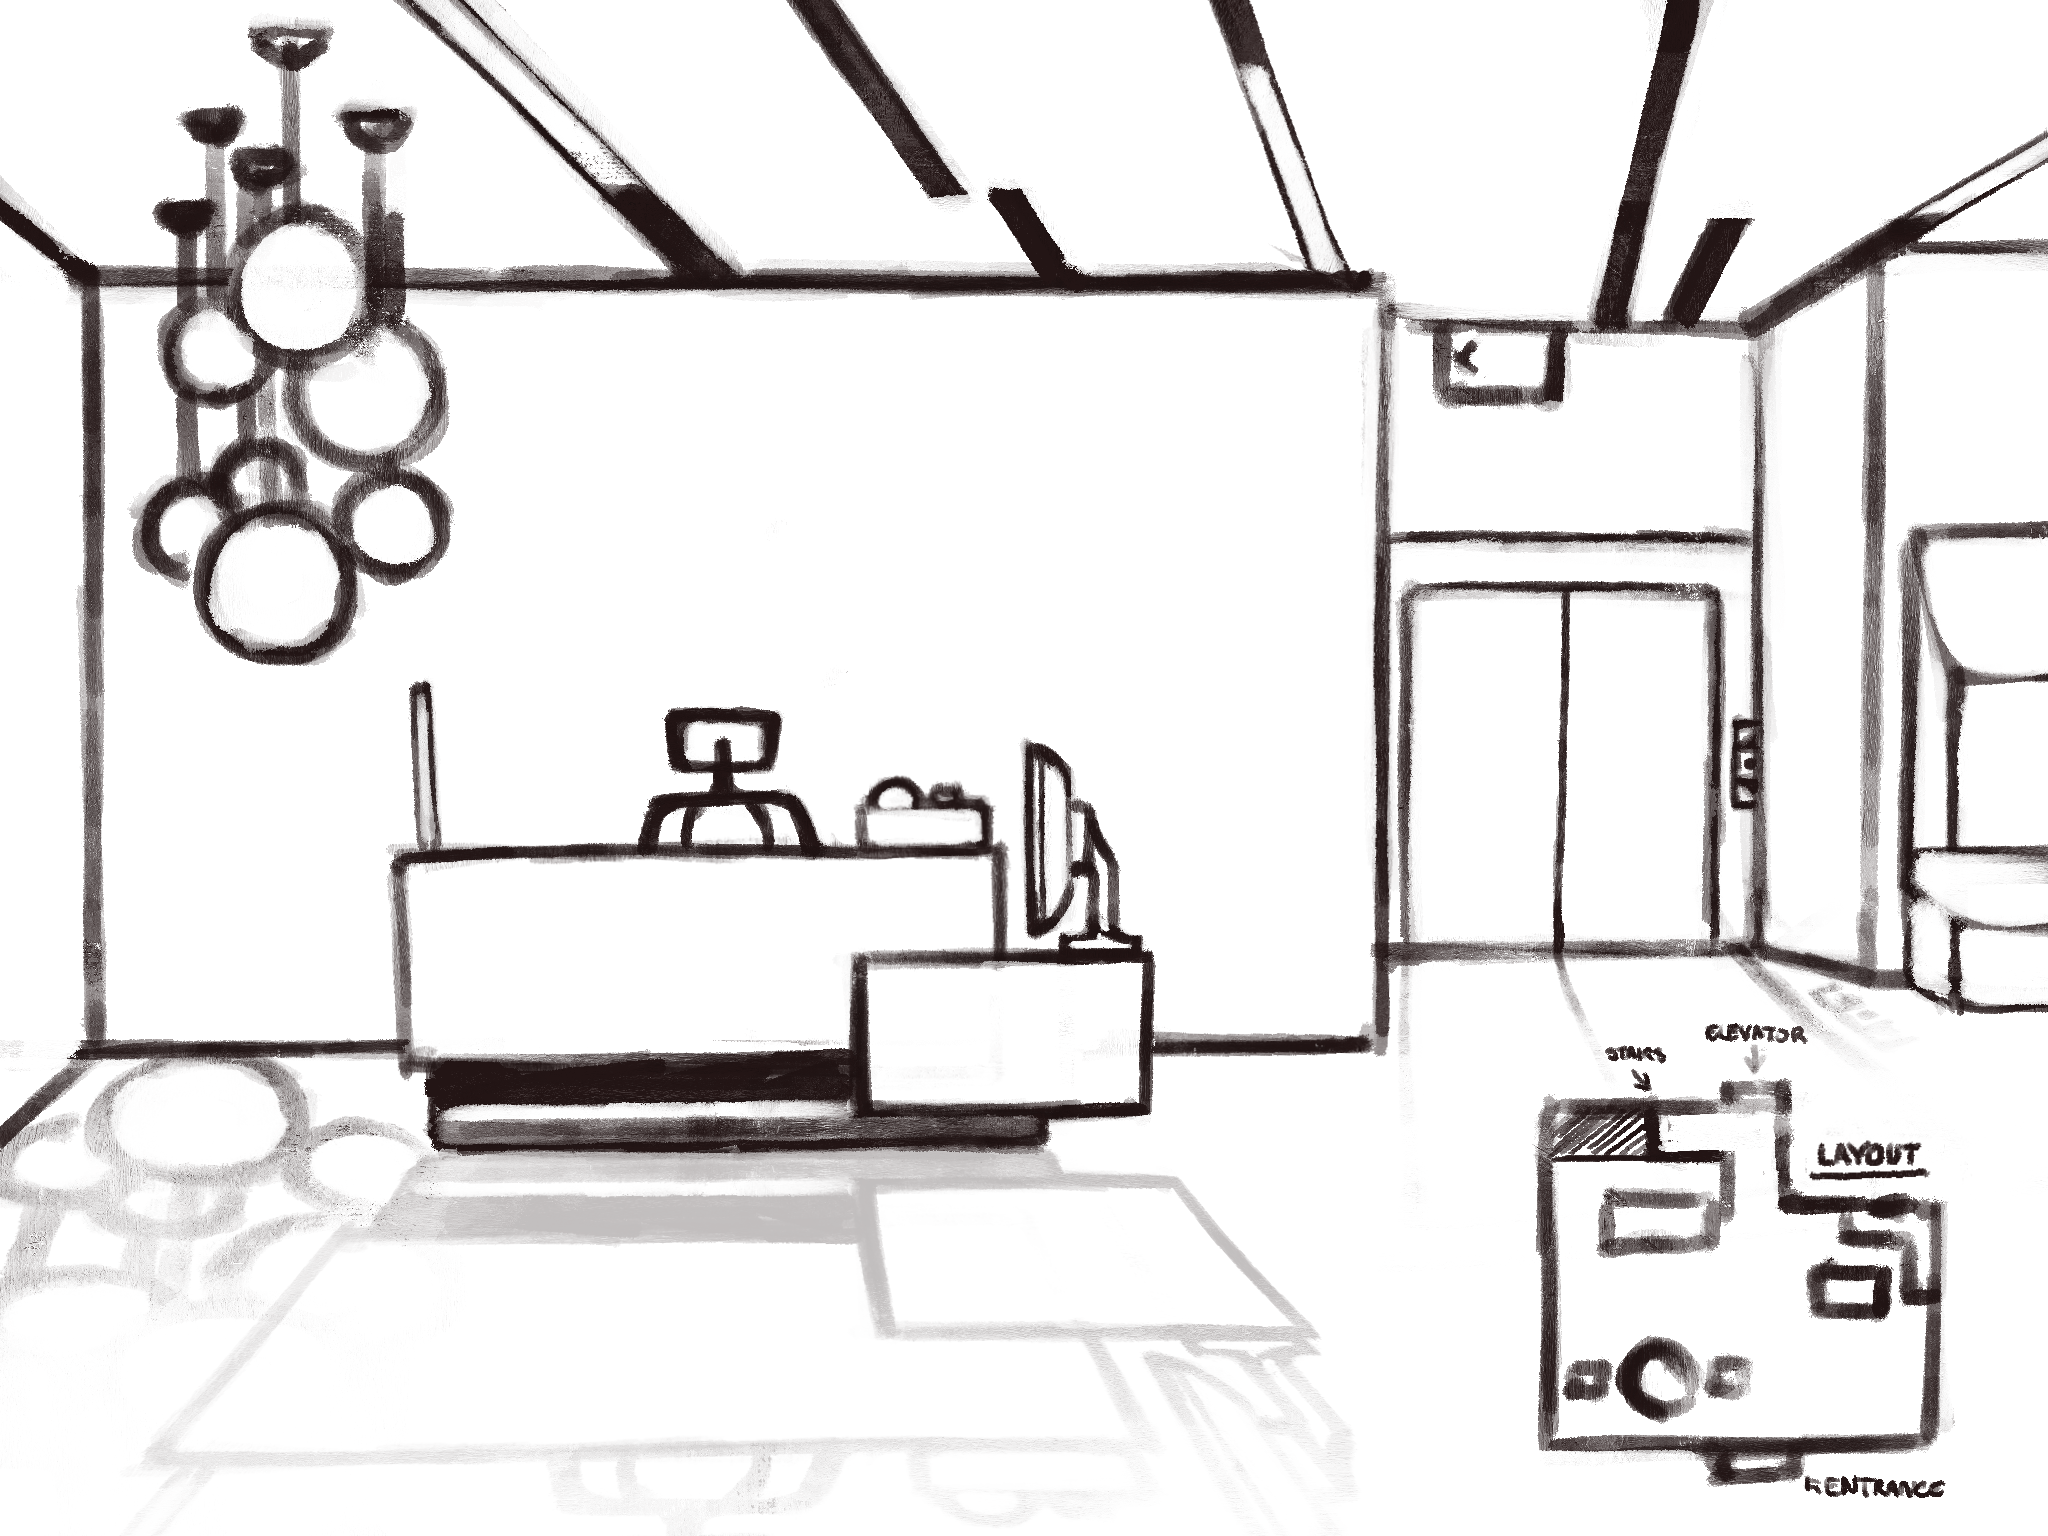 Concept art for the rececption room from Commonplace. It was drawn by Katherine Amersbach